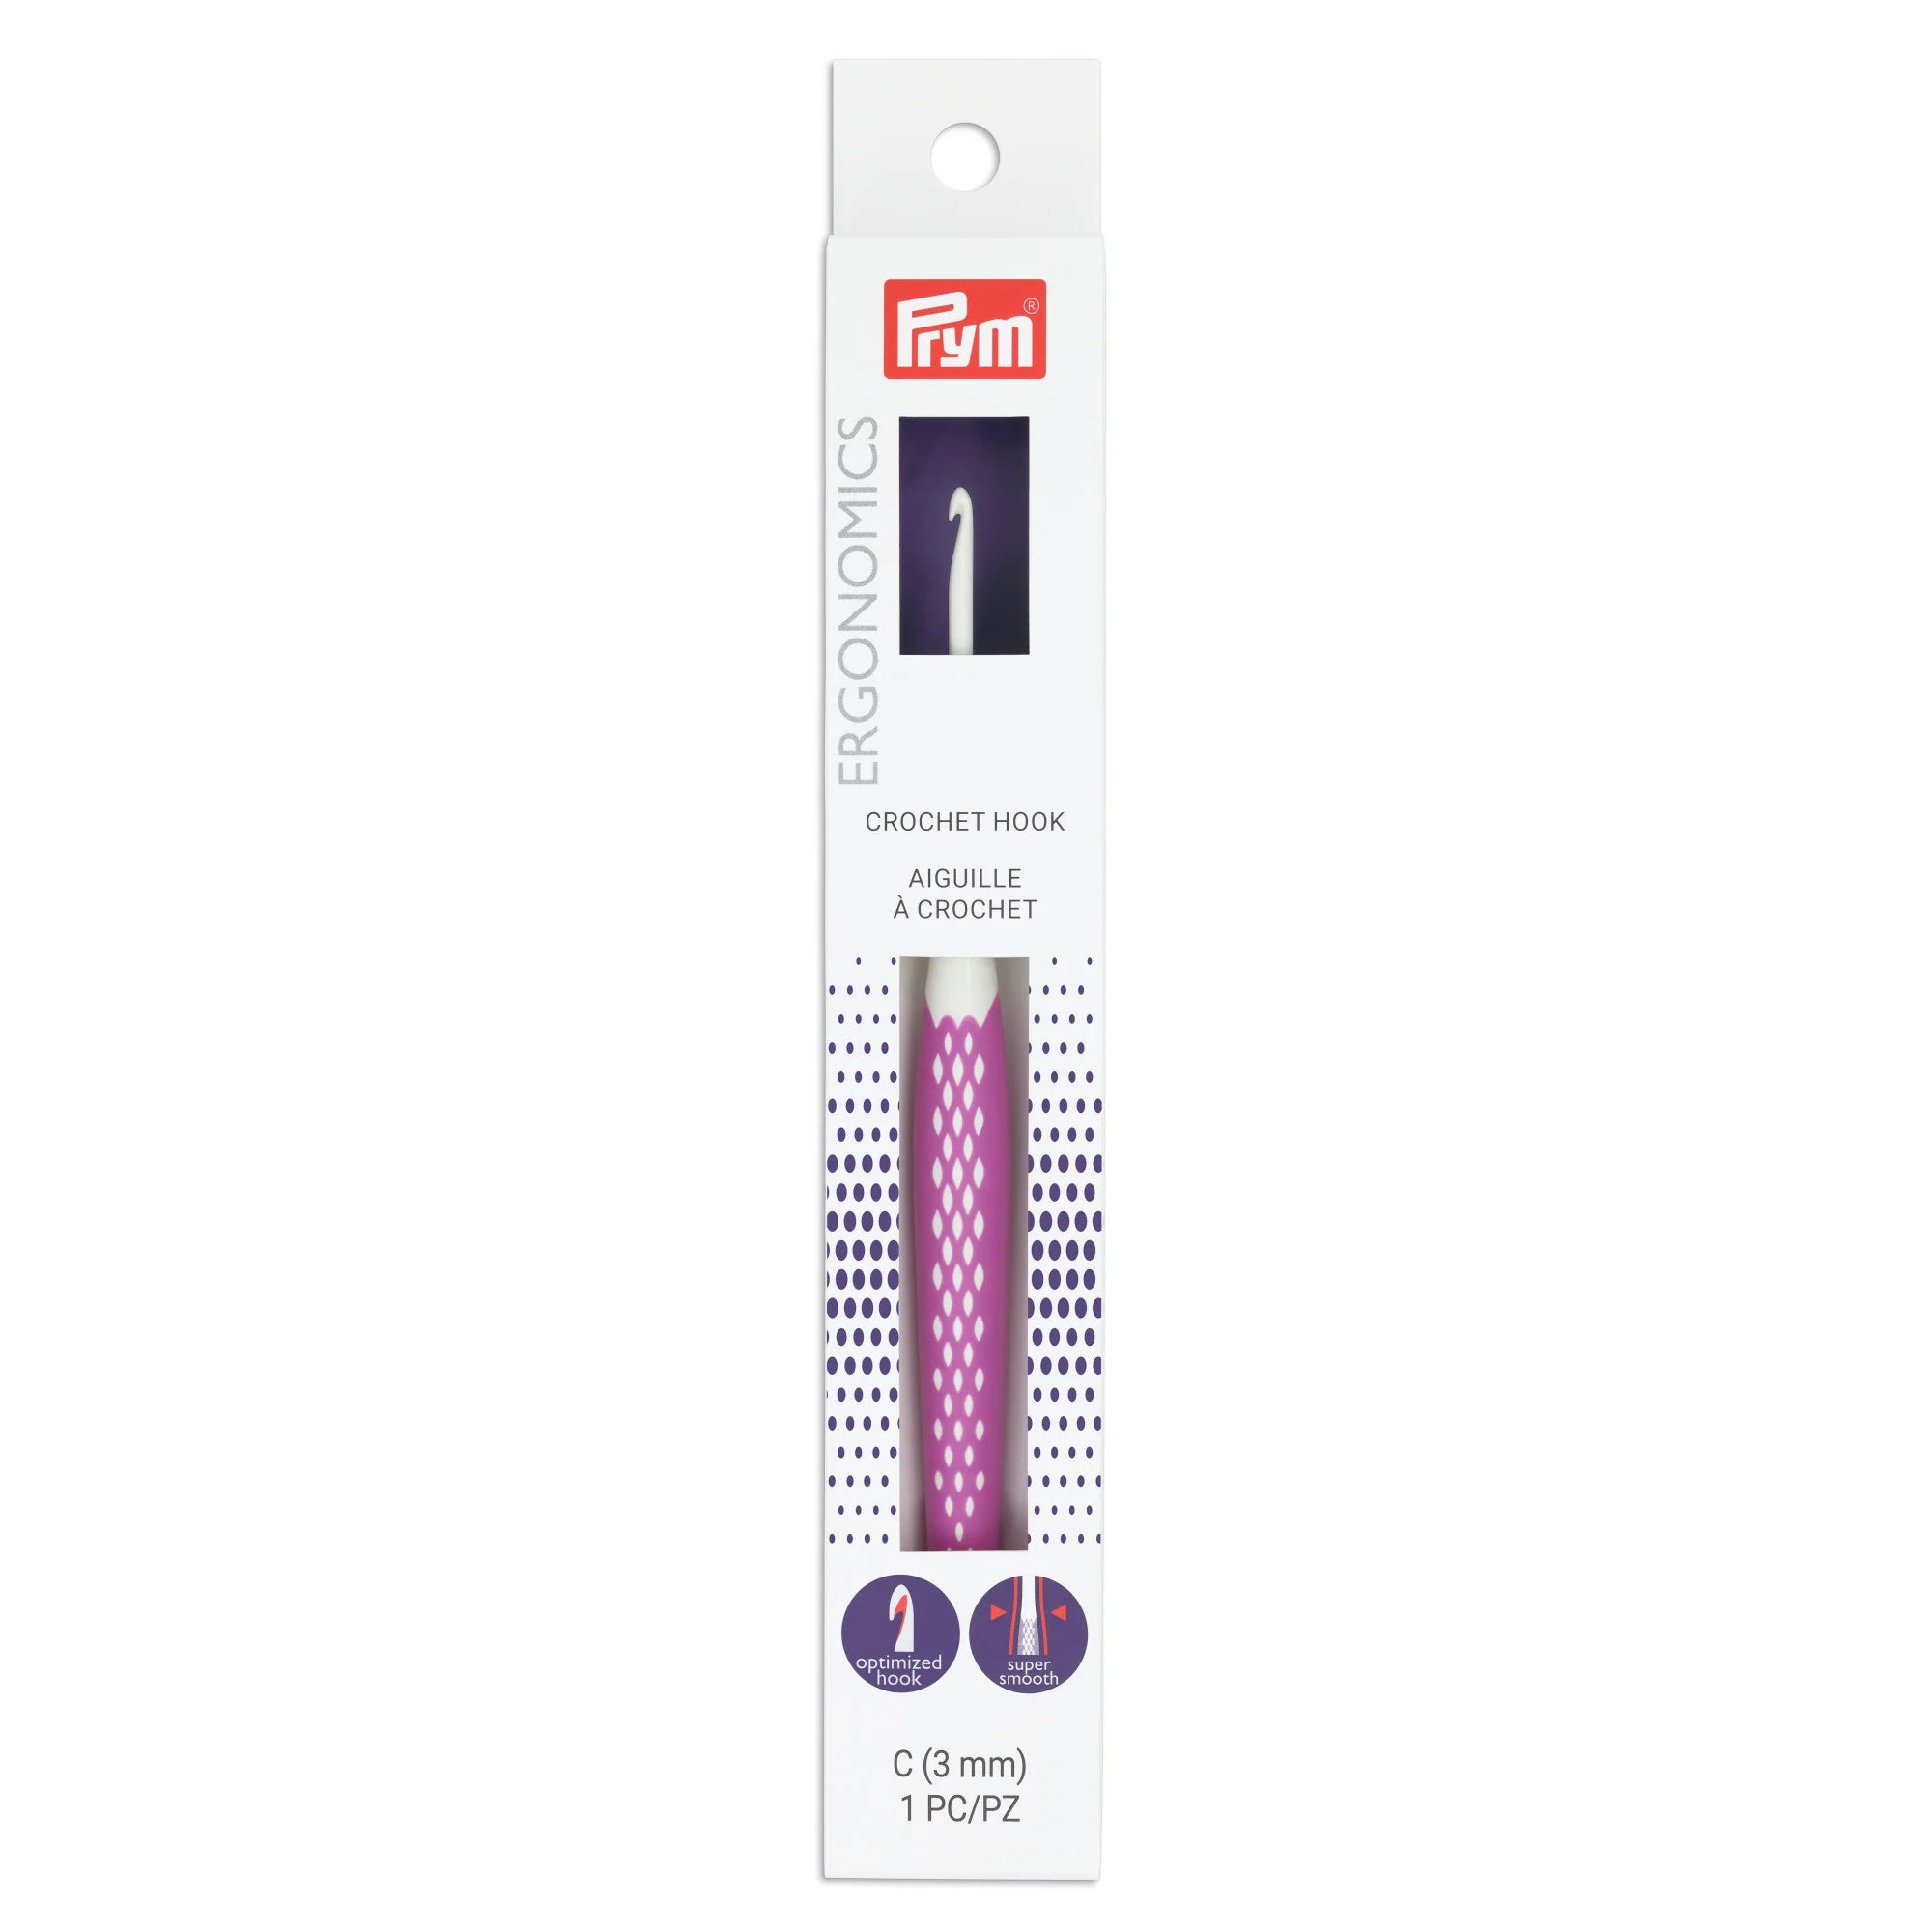 PRYM SOFT TOUCH Crochet Hook Review / COACHH Confessions 